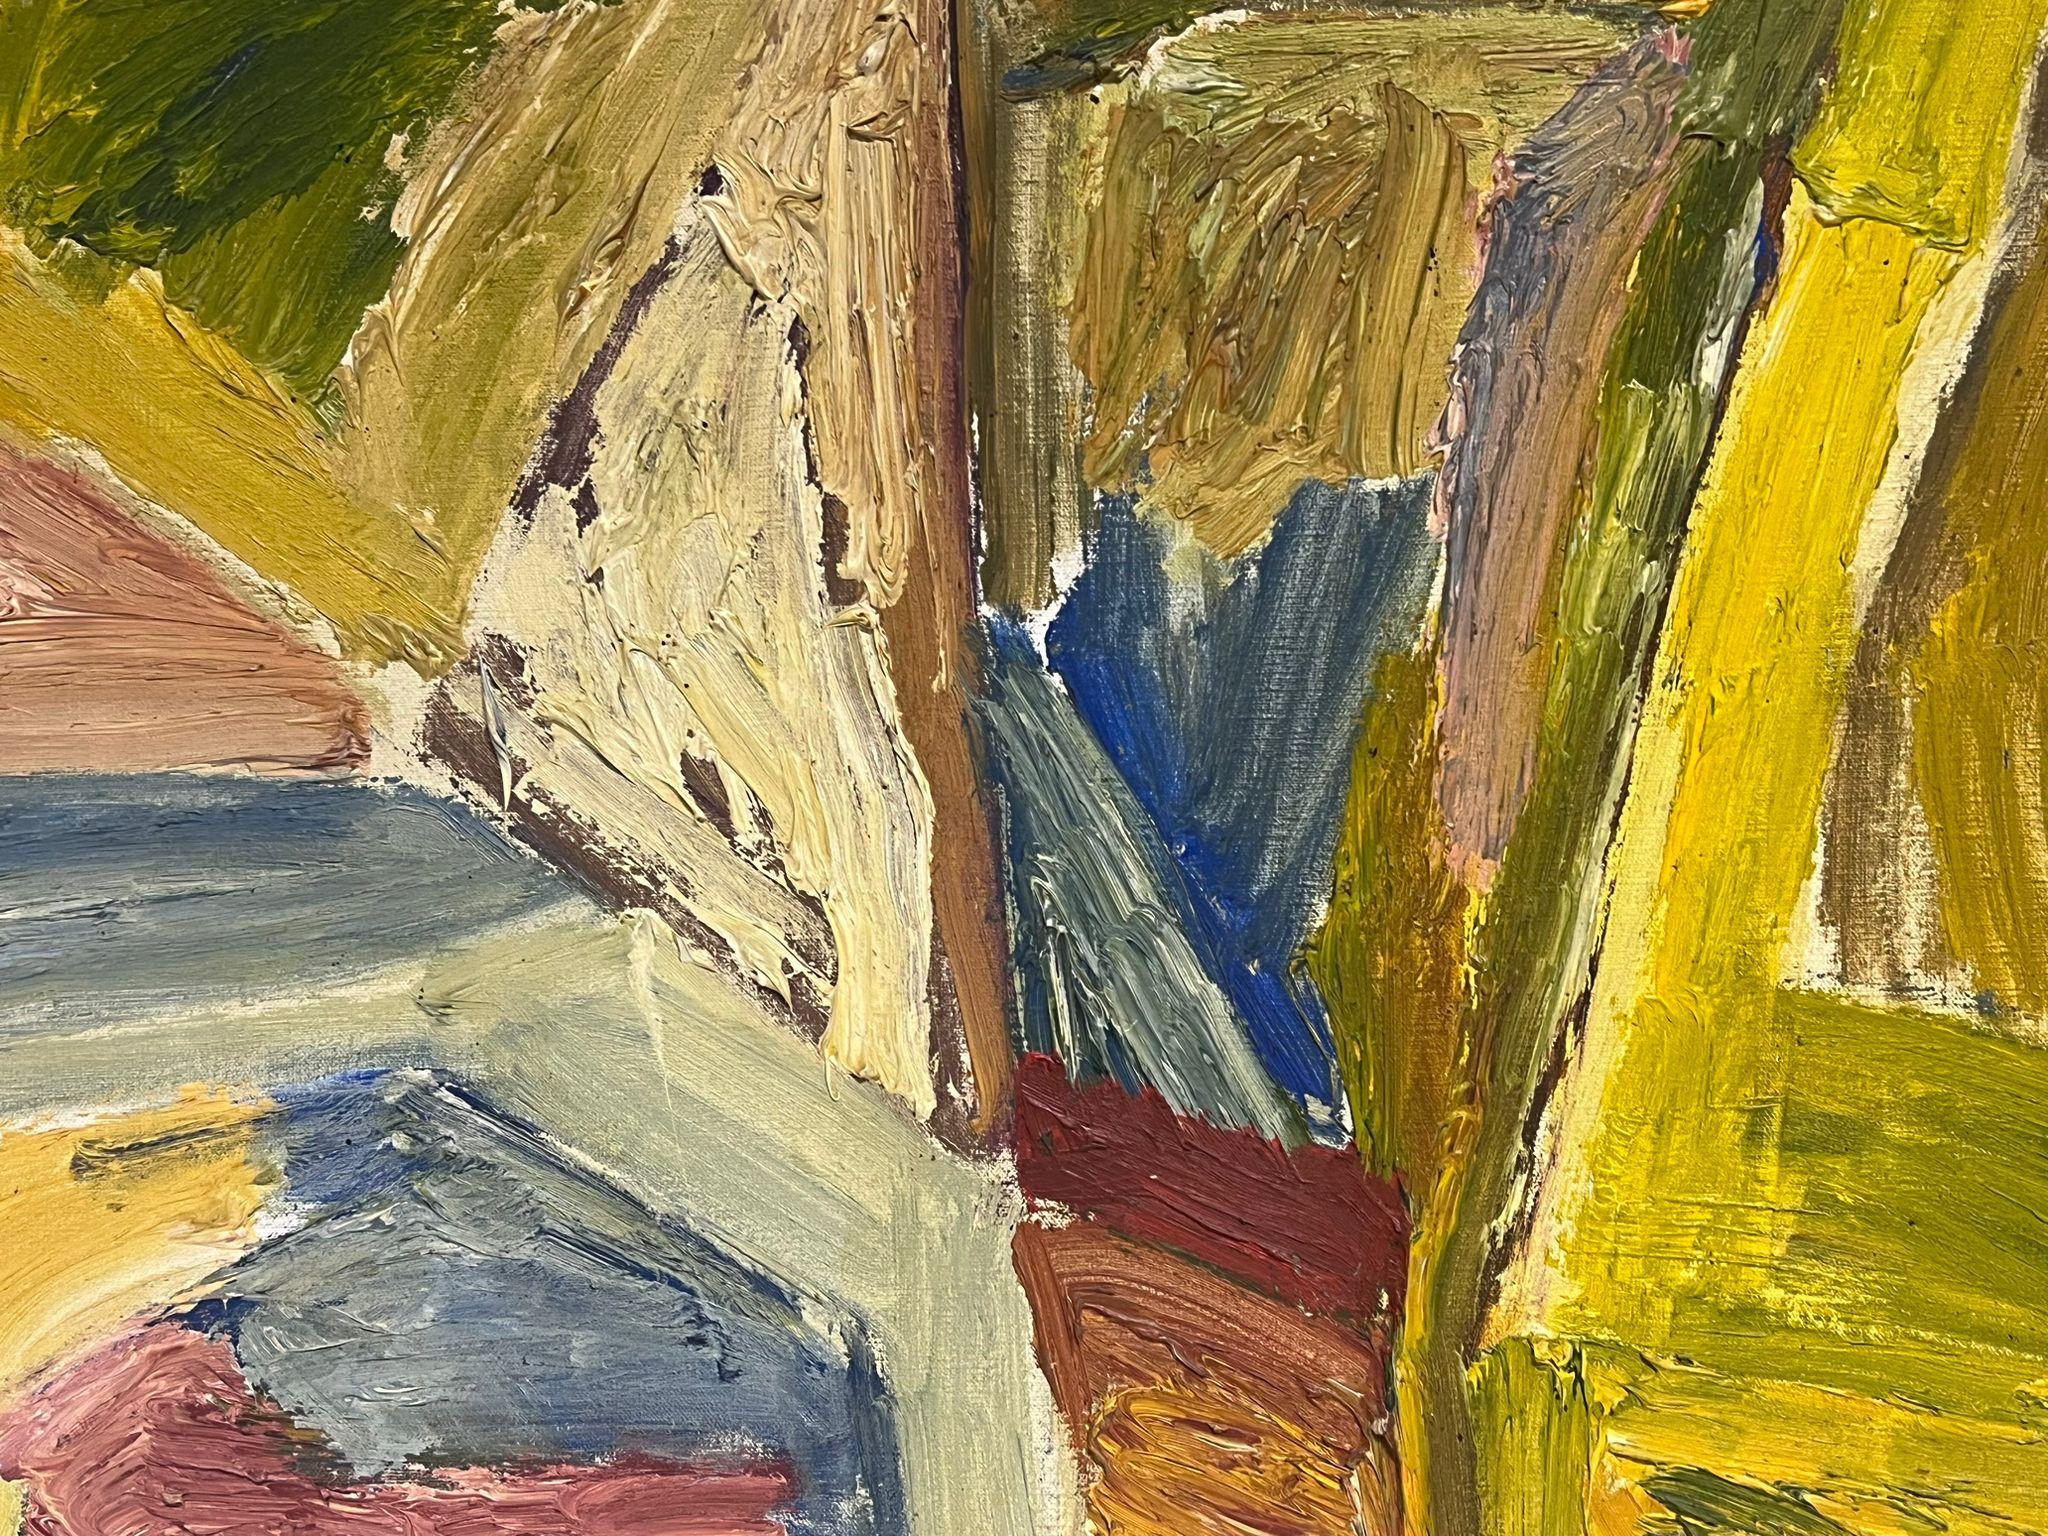 Abstract Expressionist Composition
by Joseph Terdjan (Lebanese 1925-2001)
signed & dated 1971
oil painting on canvas, unframed
canvas: 32 x 39.5 inches
provenance: private collection, France
condition: very good and sound condition